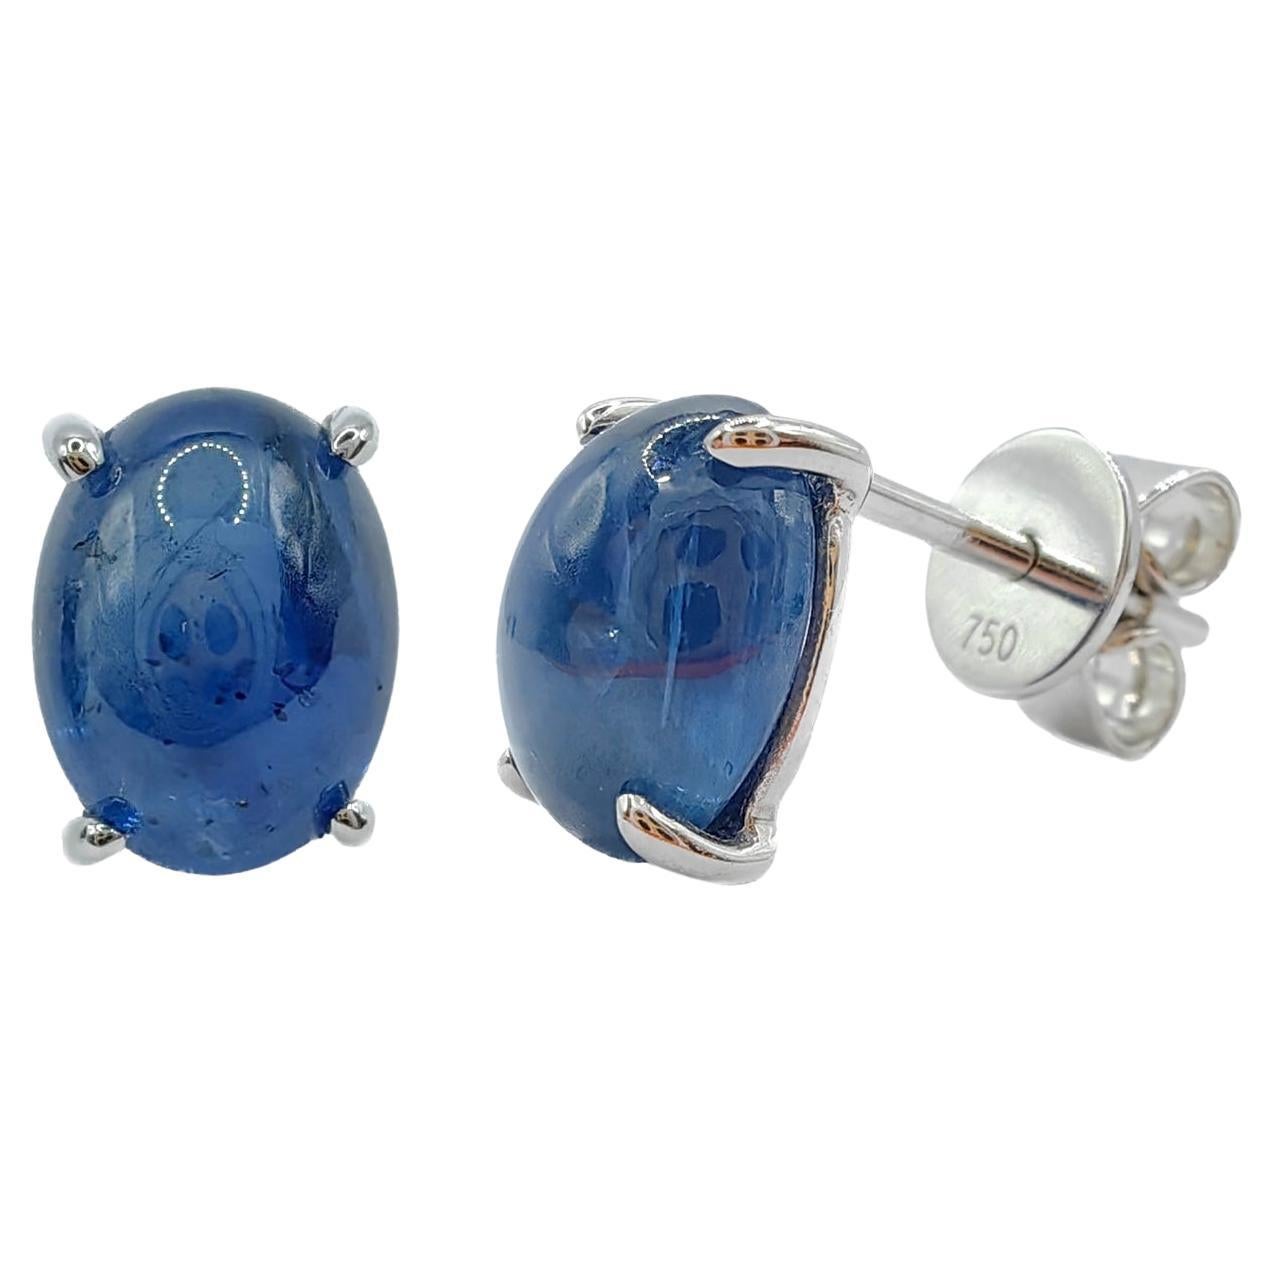 Matched 4.24 Carat 8x6mm Cabochon Blue Sapphire Stud Earrings in 18K White Gold